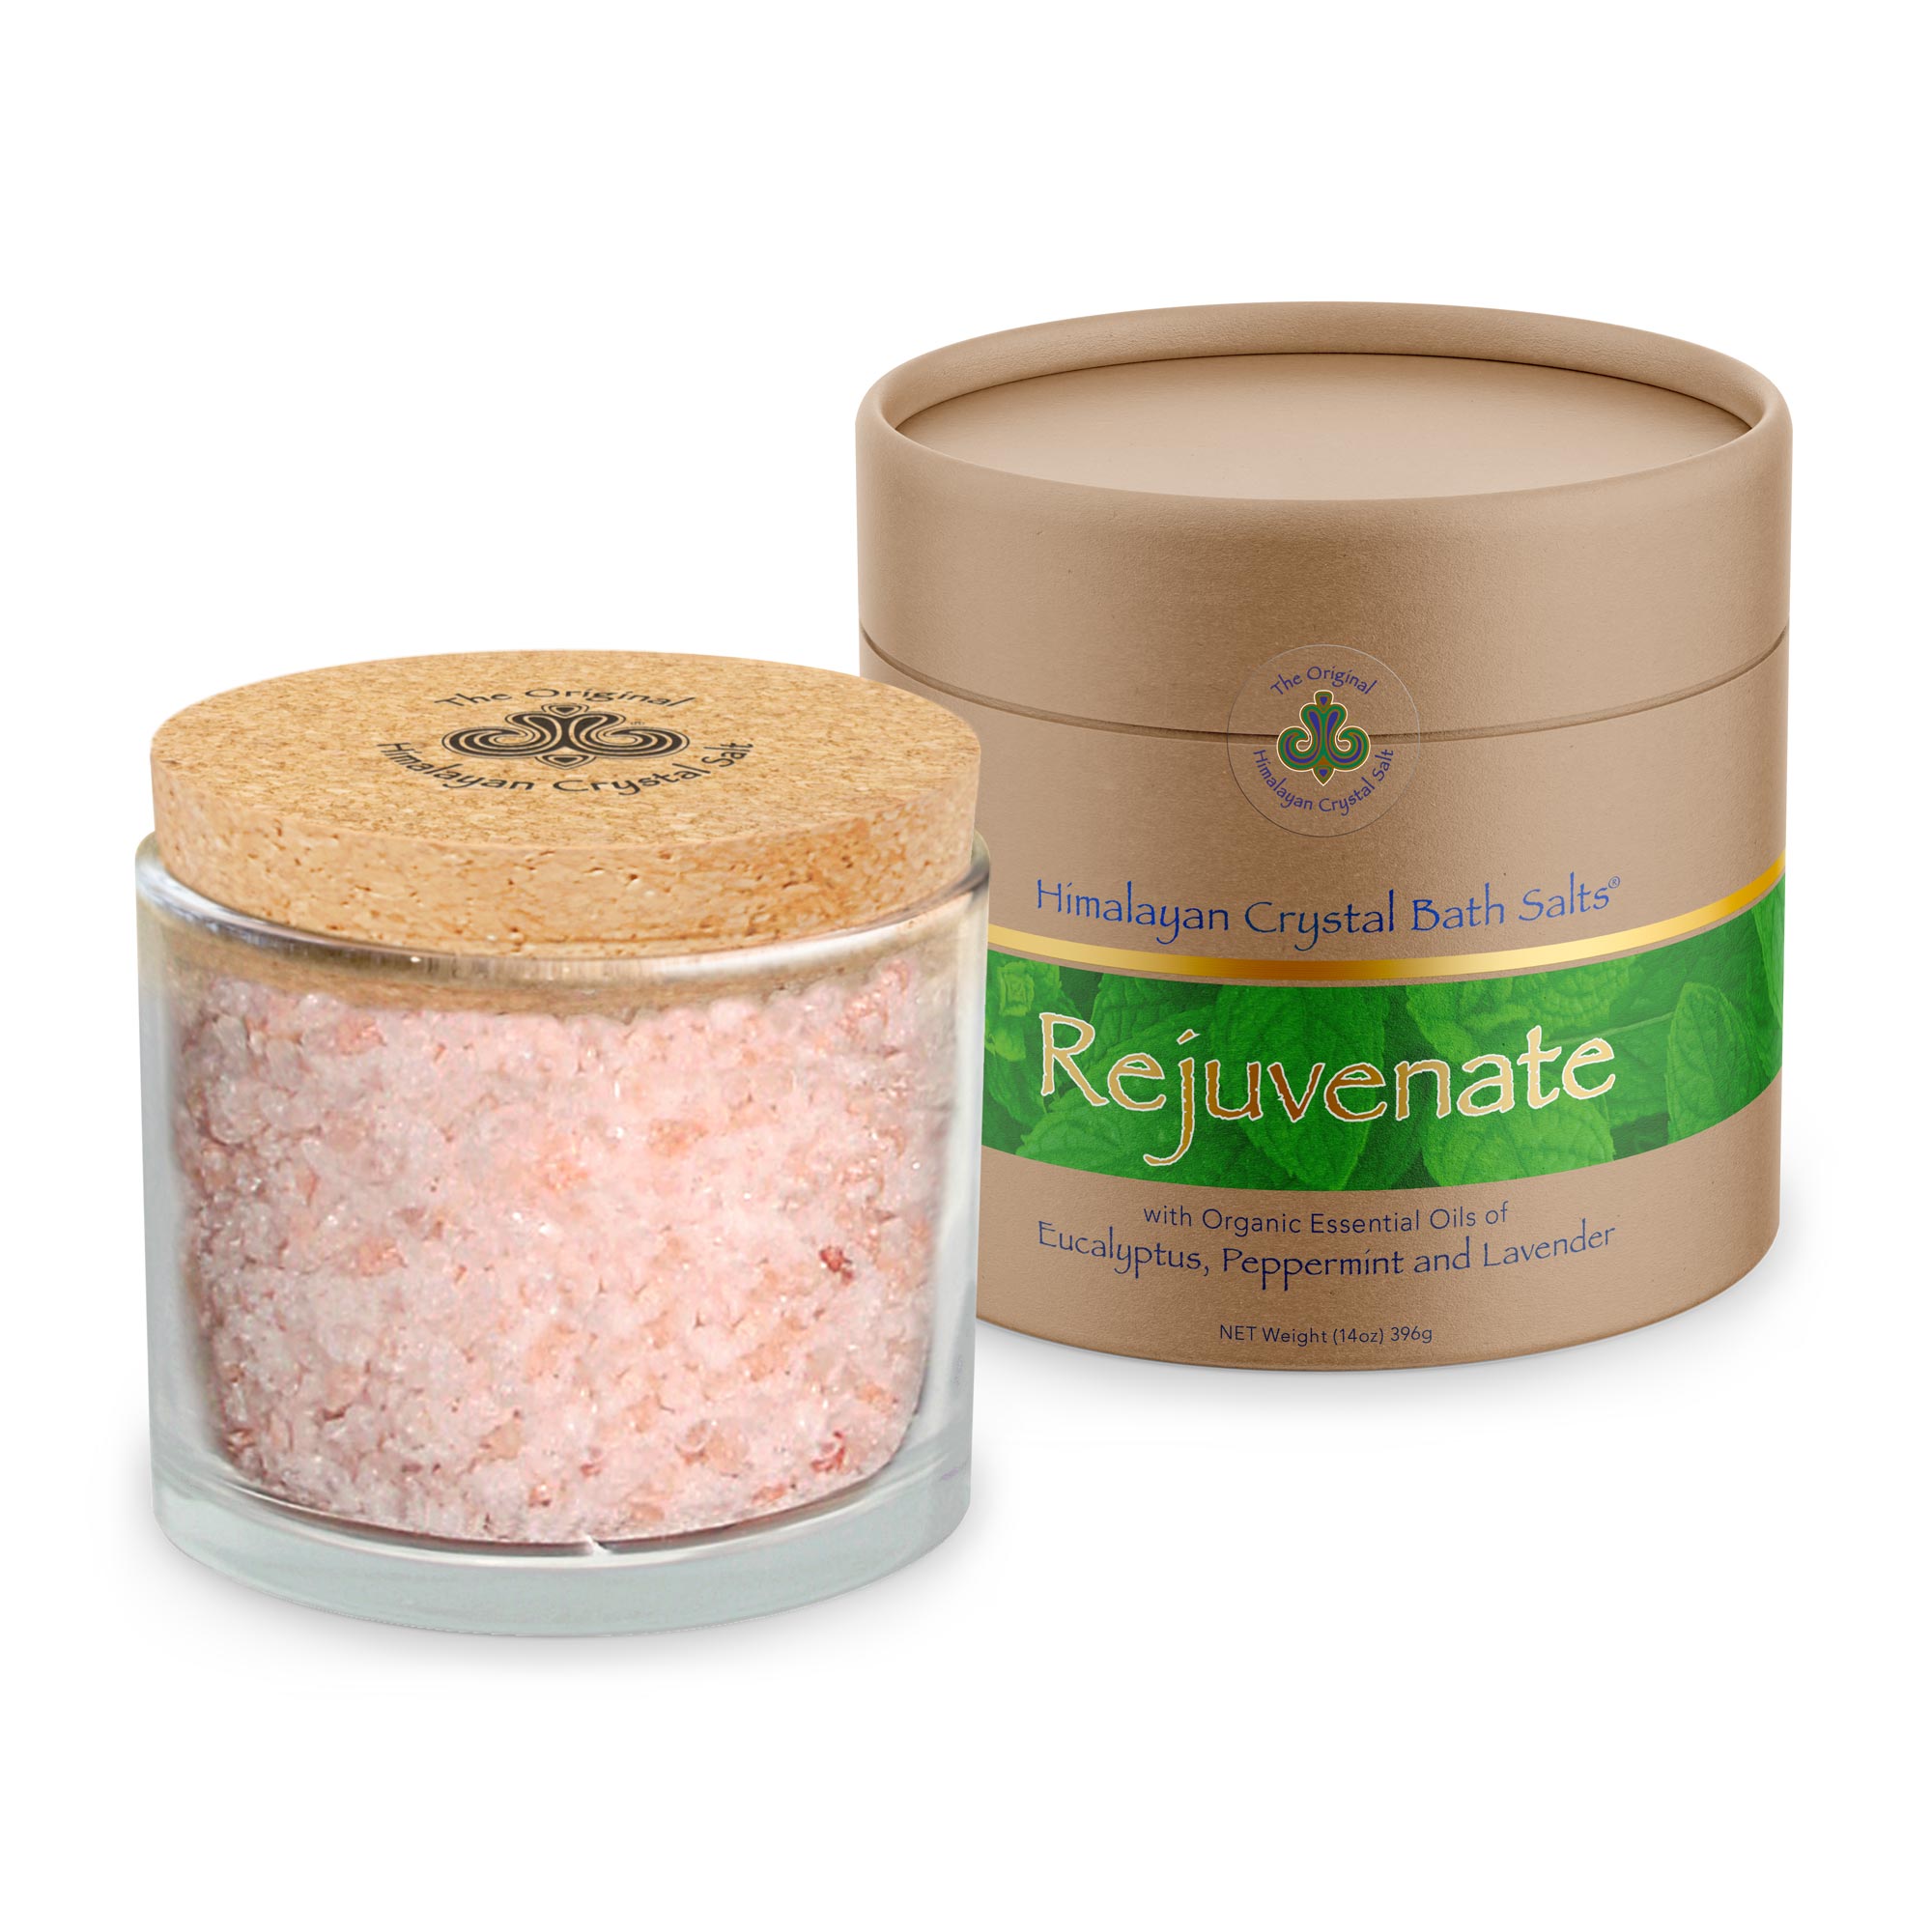 Rejuvenate with this pure bath salt blend of 100% organic eucalyptus, peppermint, and lavender essential oils.  This renewing scent helps soothe tight muscles, ease tension, and provides a deeply invigorating experience. 